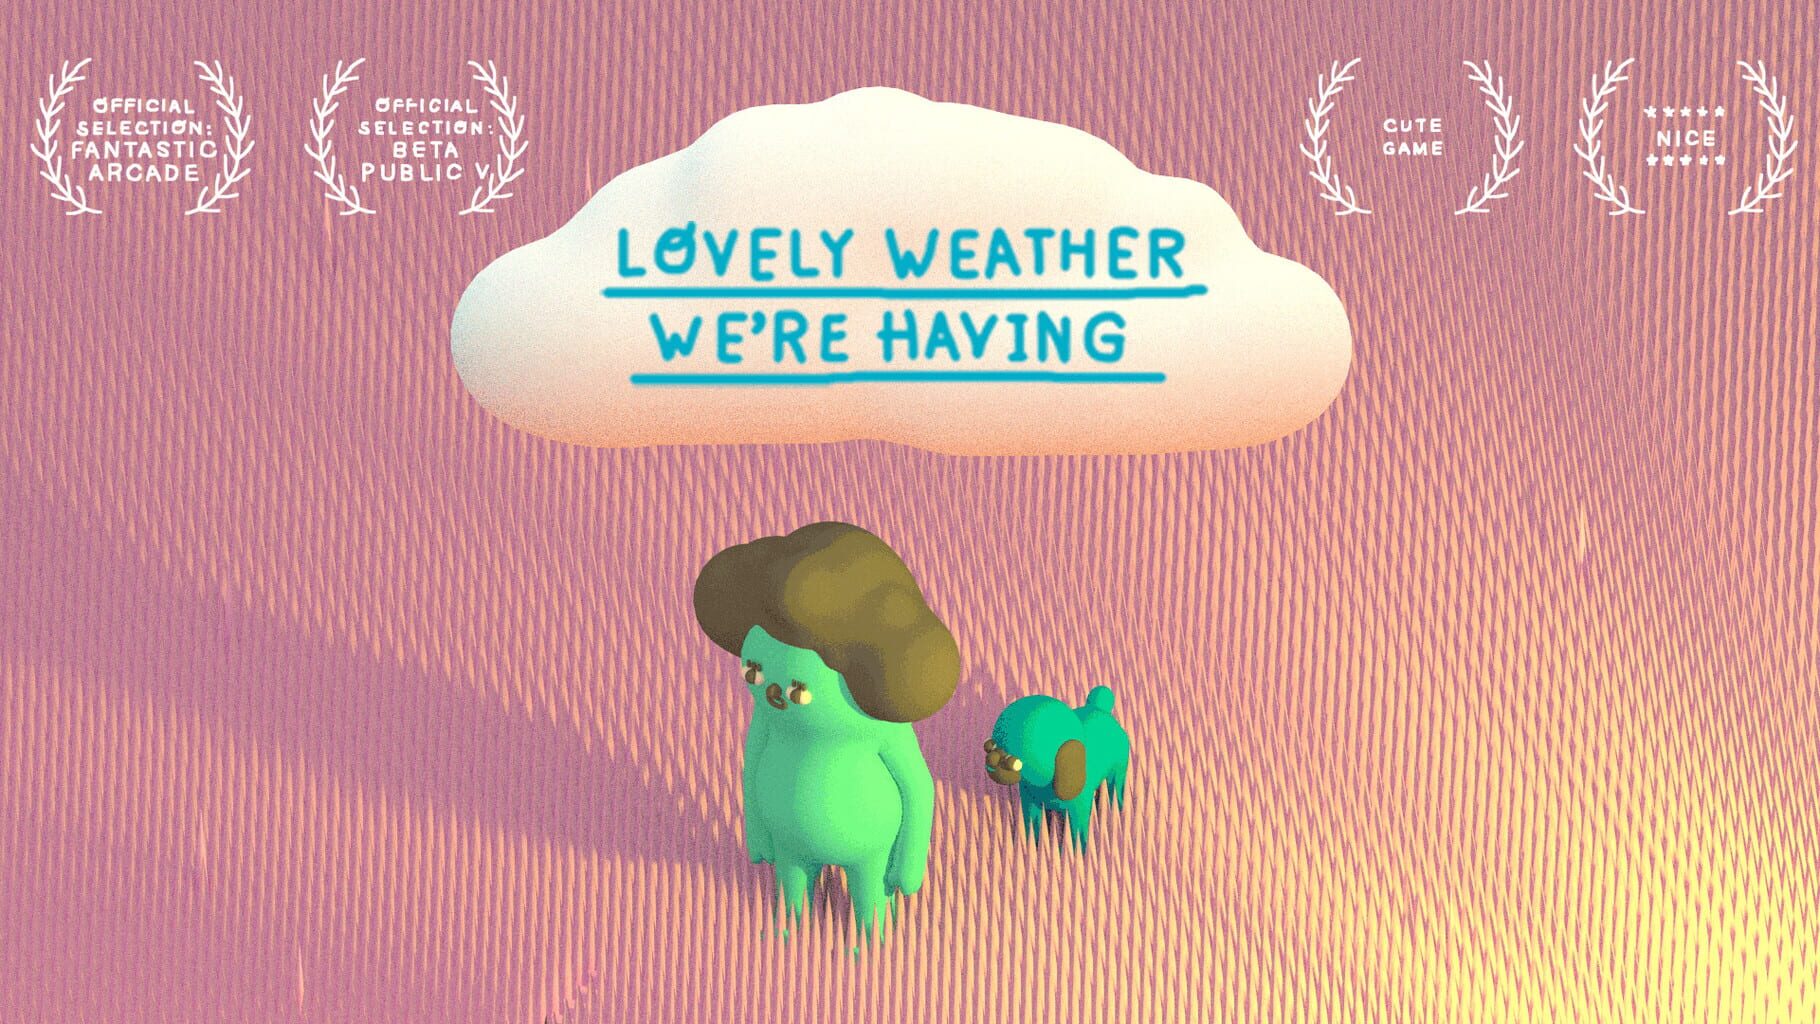 We re having a great time here. Lovely weather for Ducks идиома. Weather Love. We Love games. Welcome Starter b Lovely weather.